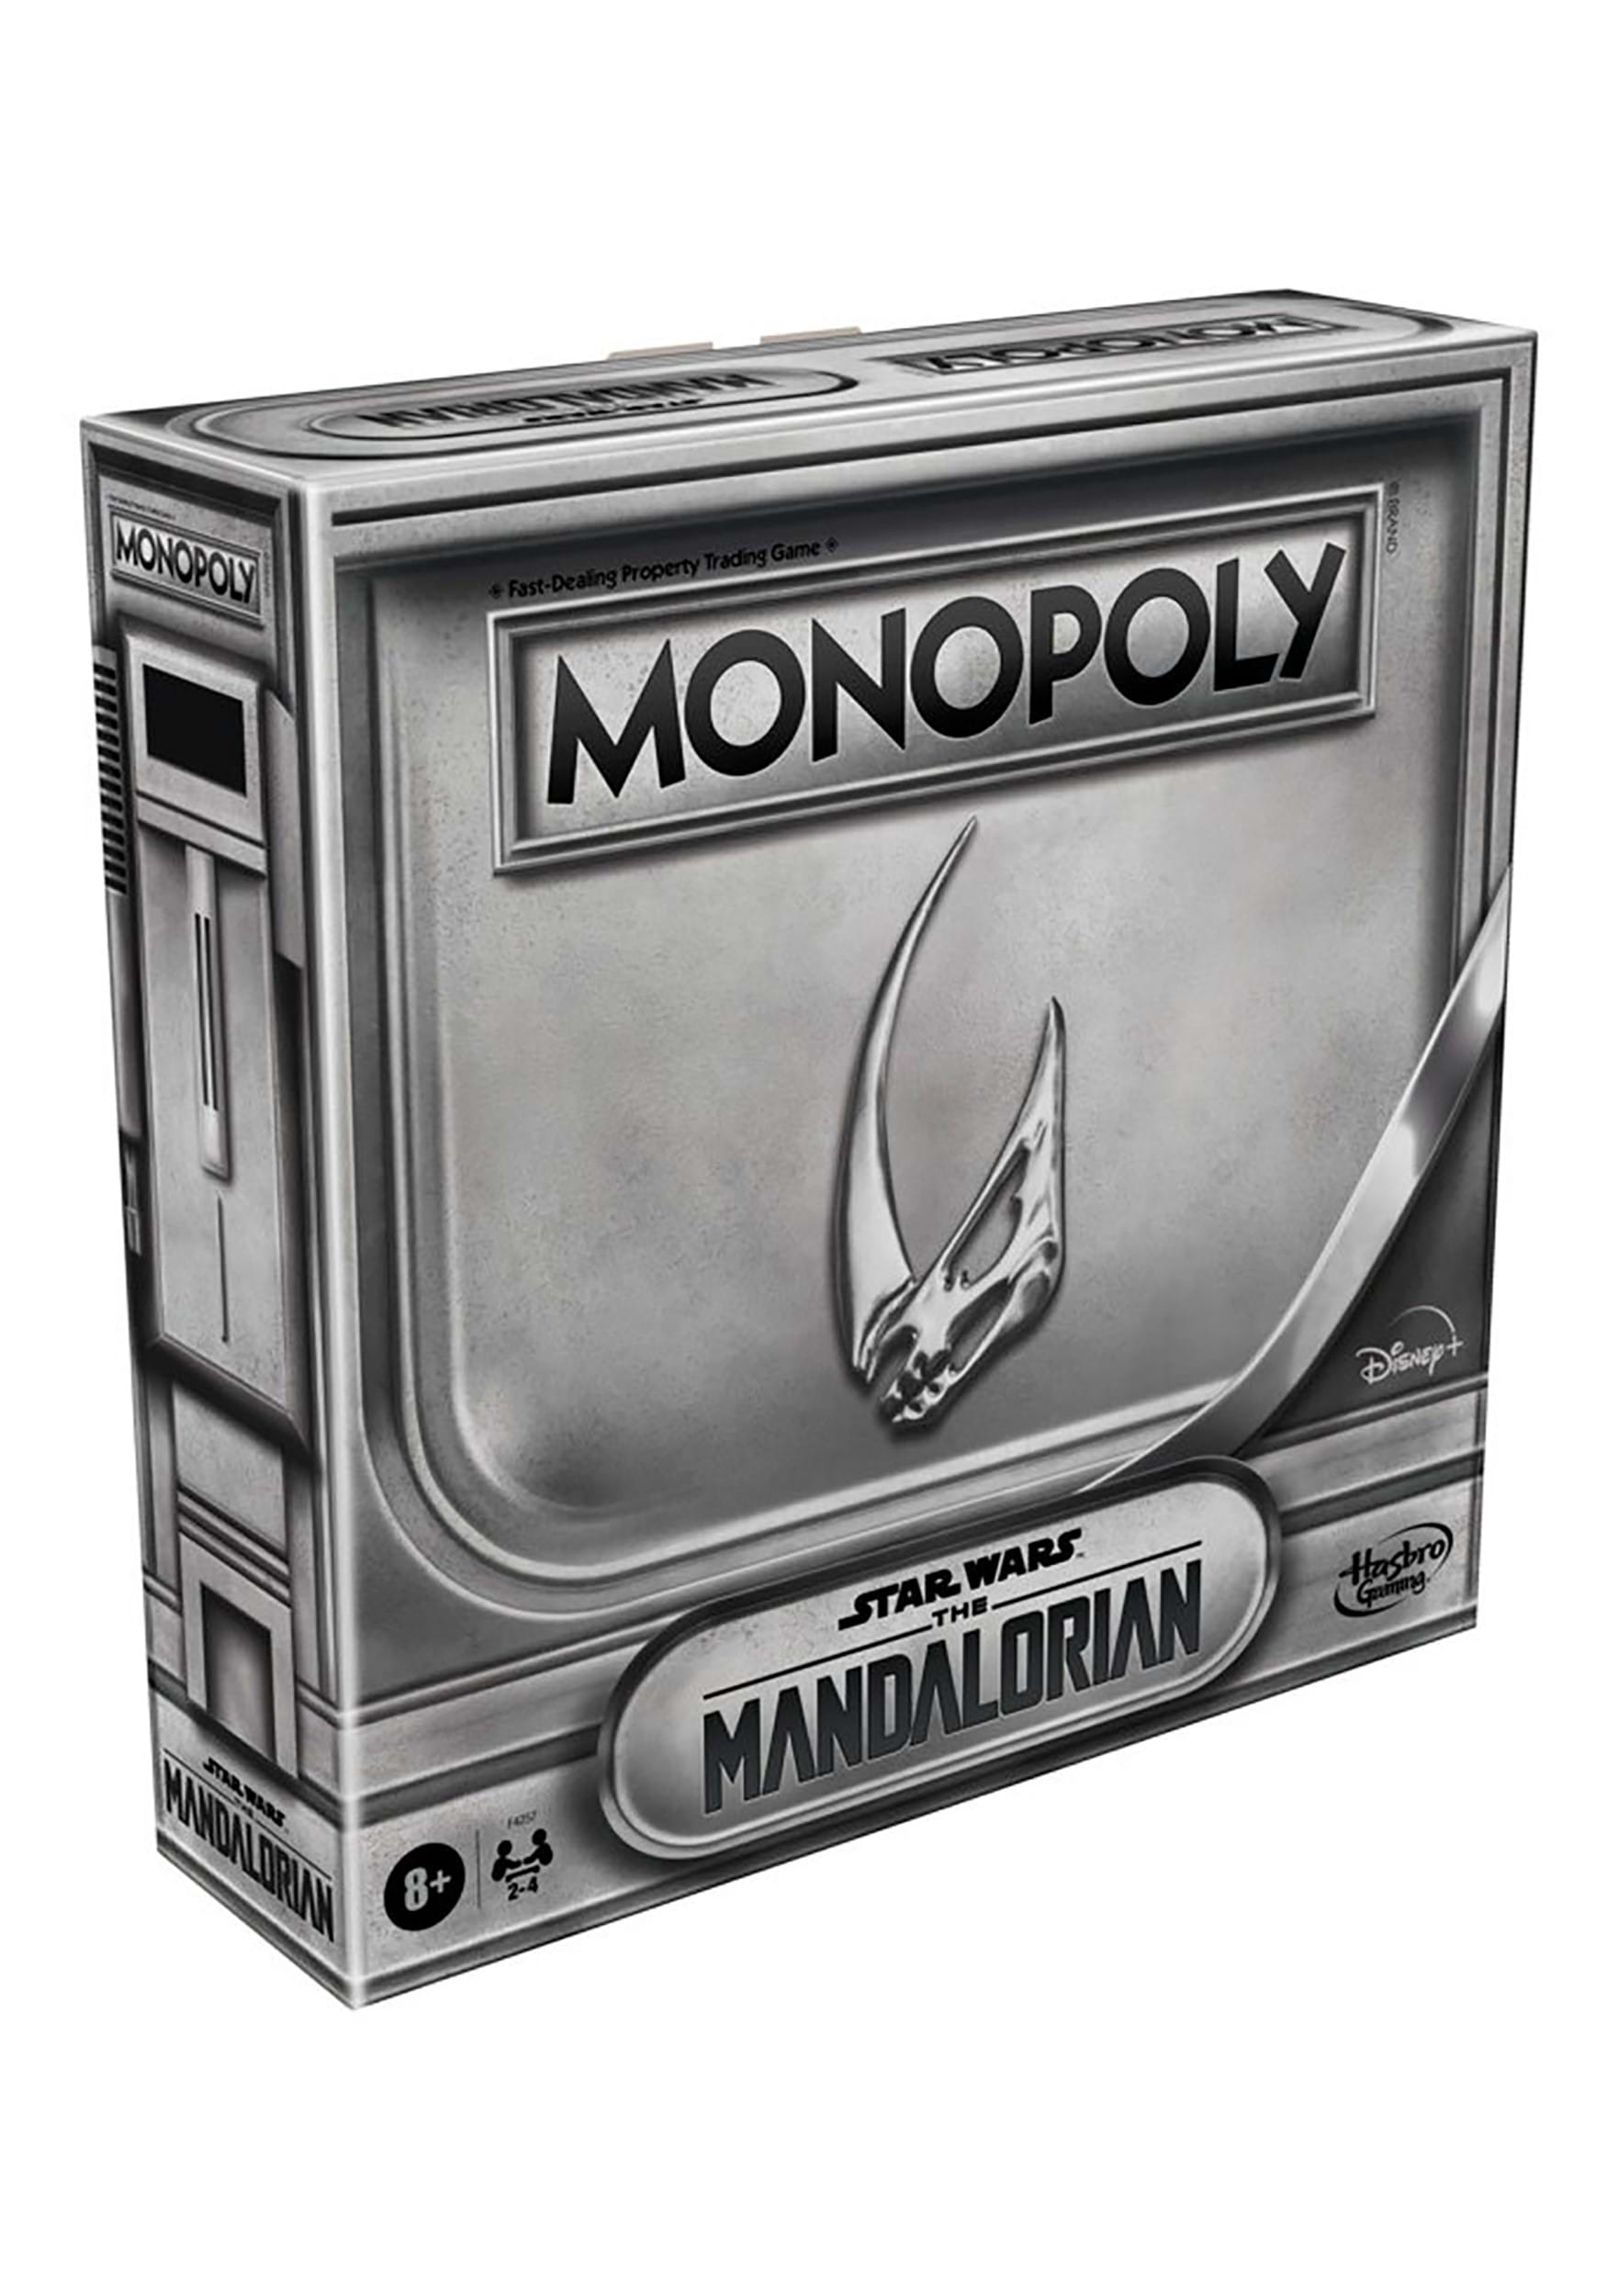 Monopoly: Star Wars The Mandalorian S2 Edition Board Game